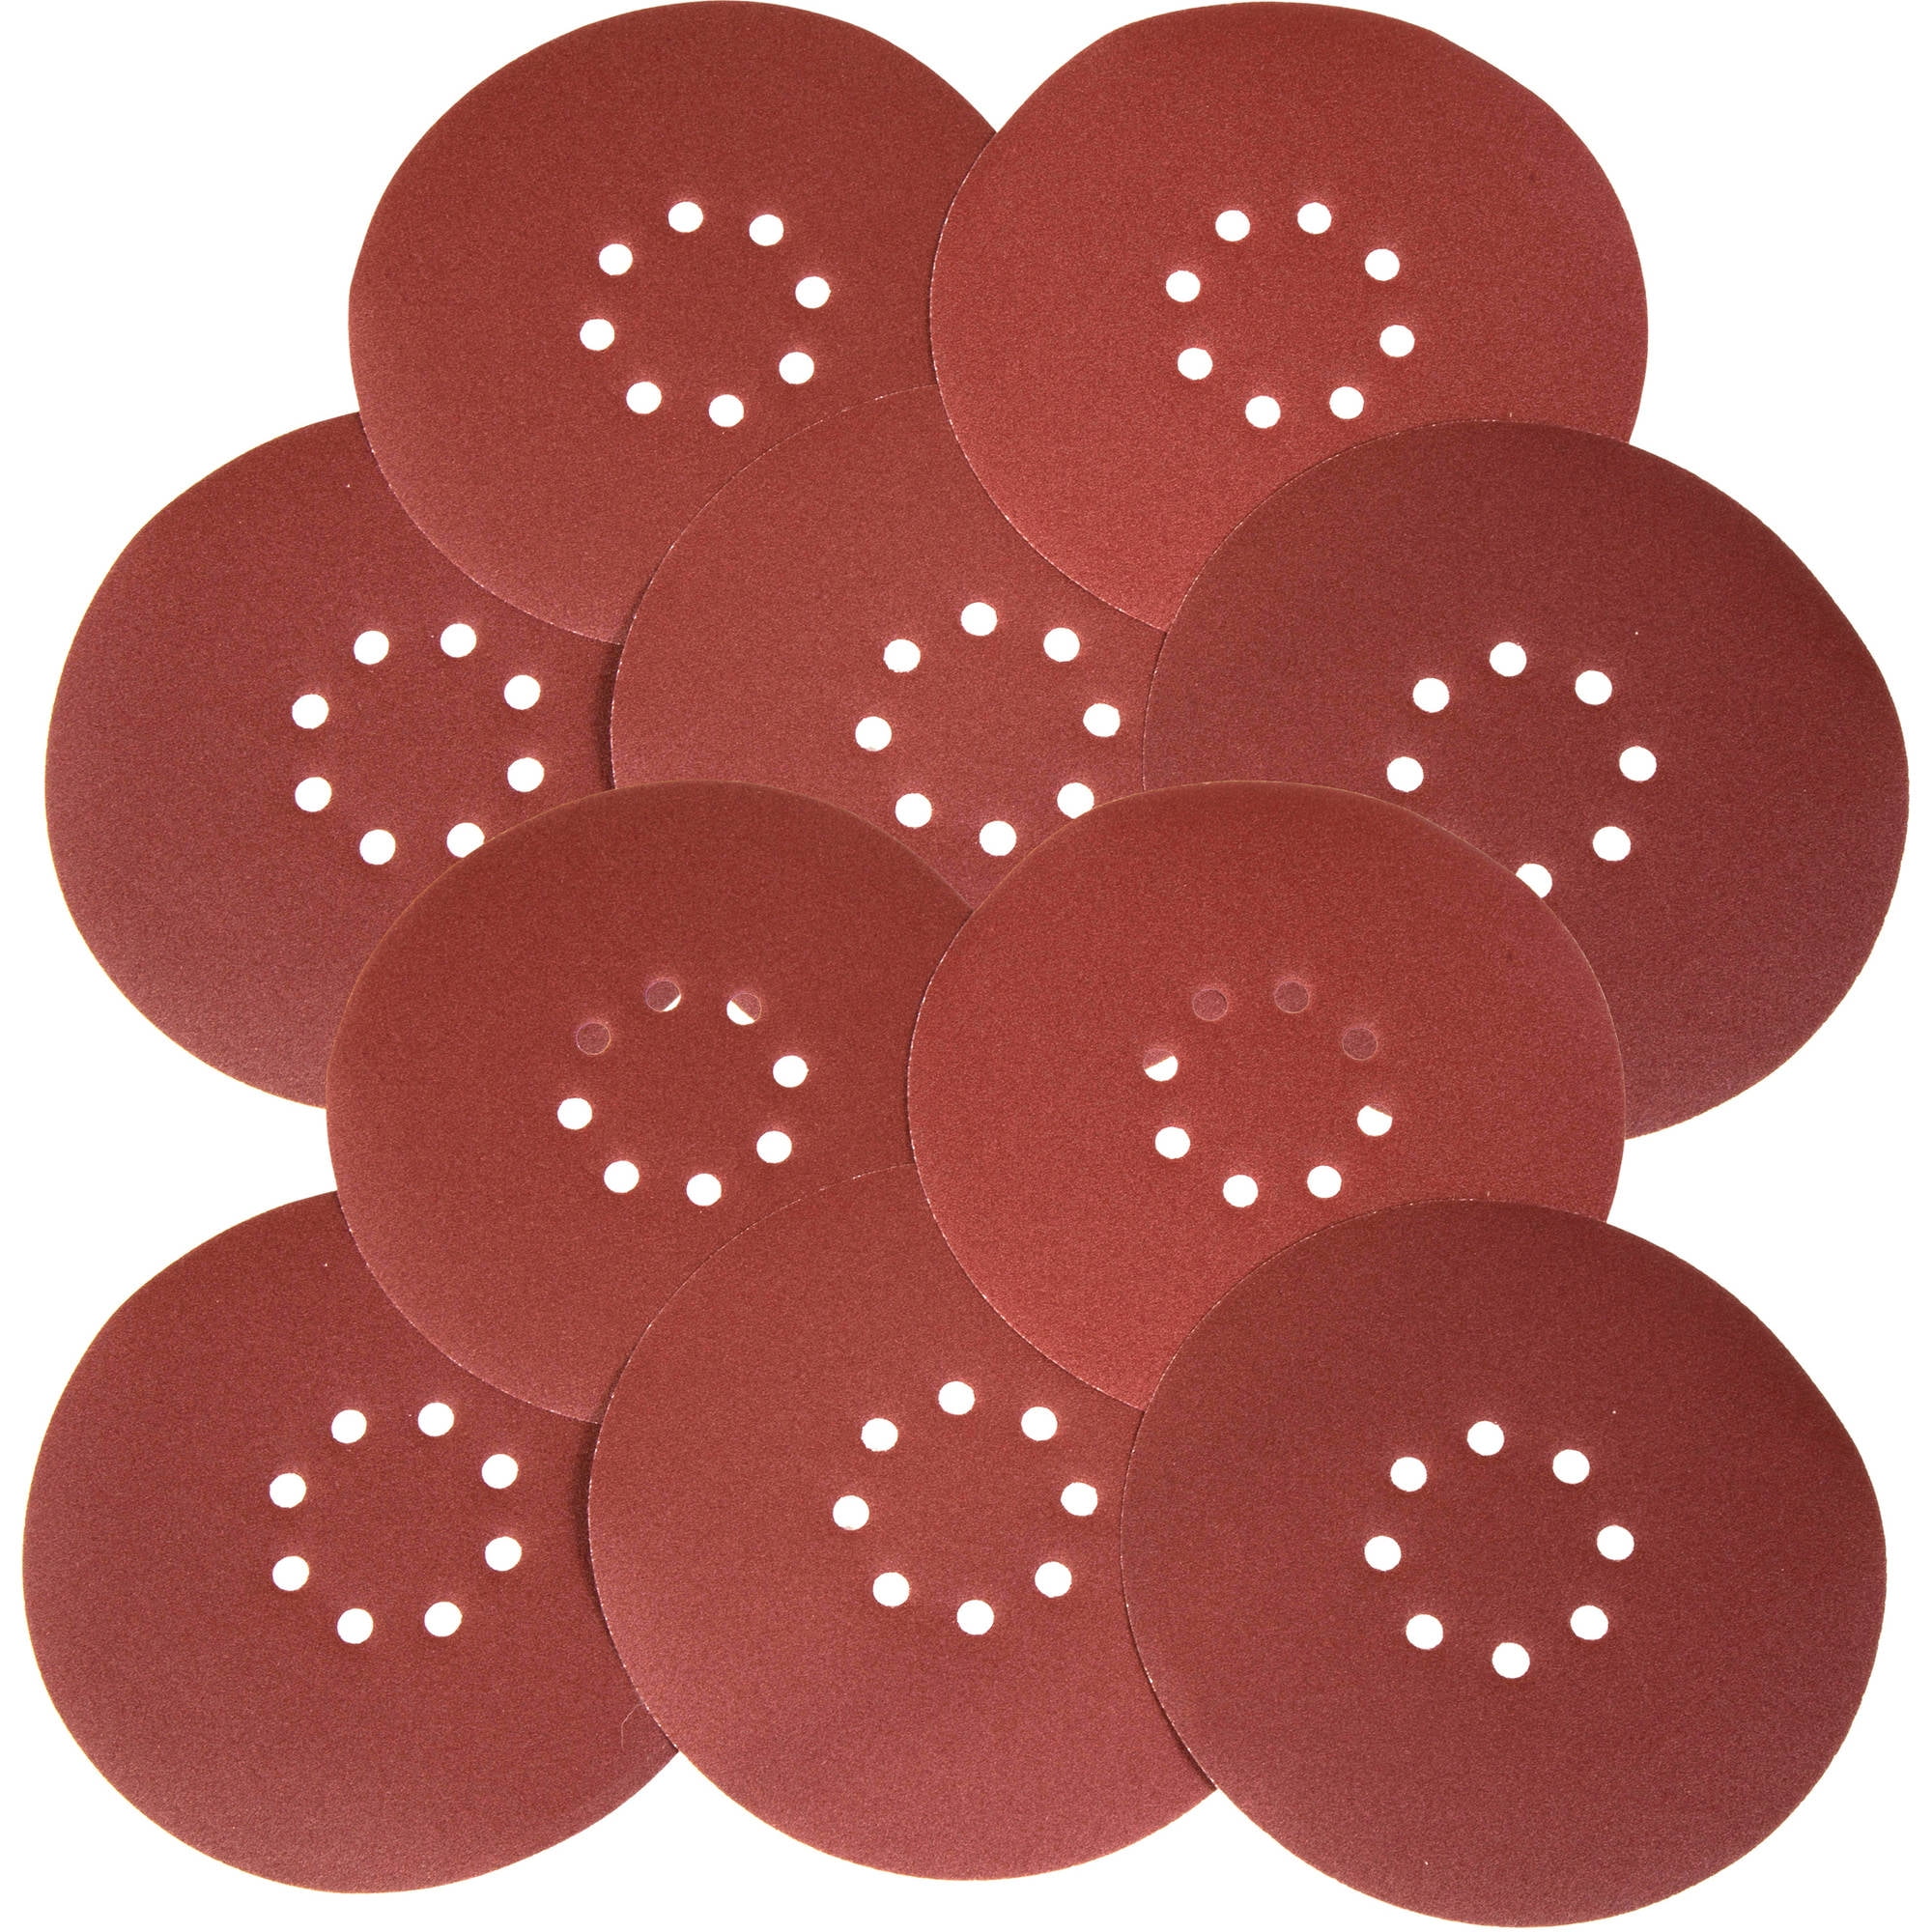 10PCS 60 80 120 150 220 Grit Foam-Backed Abrasive Pads Assortment Used with Porter-Cable 7800 Drywall Sander 8-7/8 Drywall Sanding Discs by LotFancy